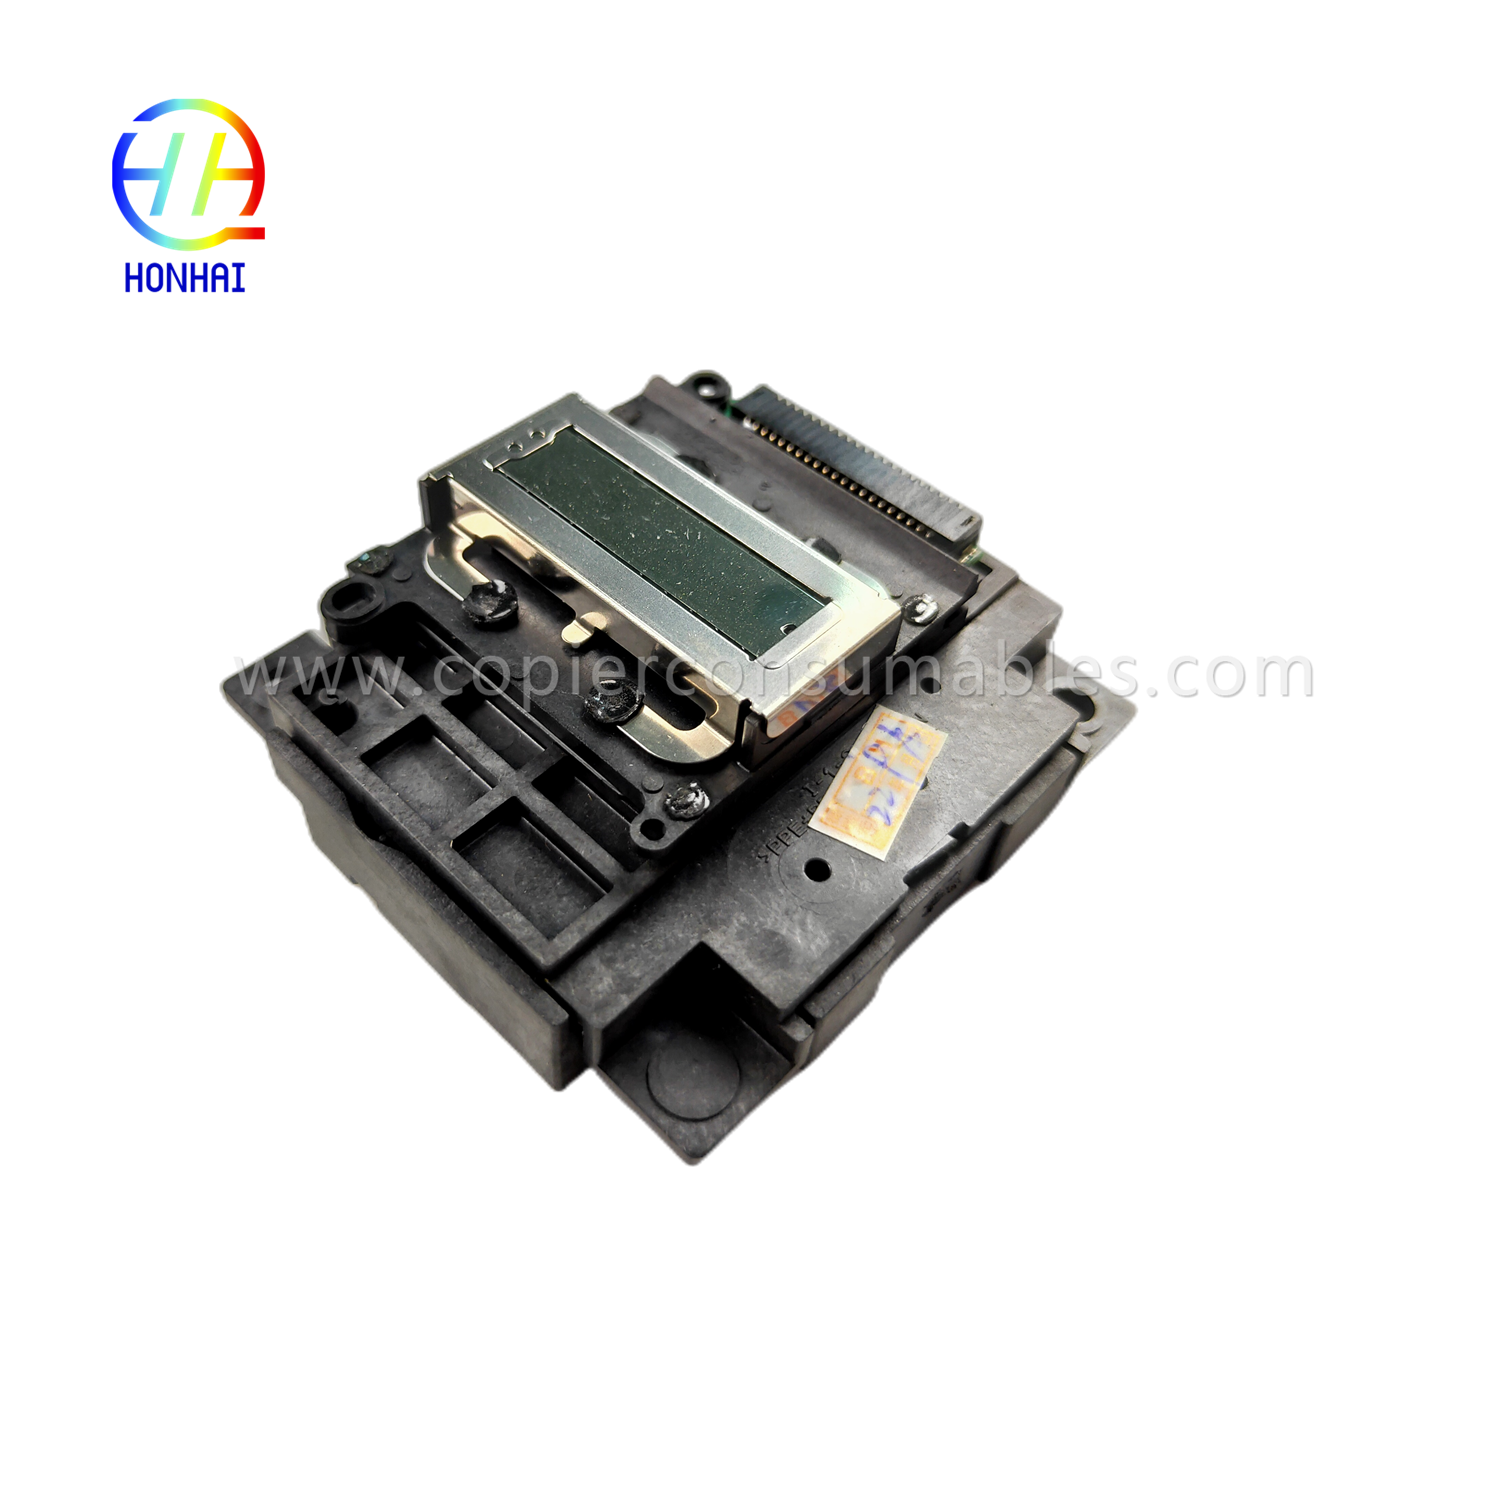 https://www.copierconsumables.com/printhead-for-epson-l111-l120-l210-l220-l211-l300-l301-l351-l355-l358-l360-l365-fa04000-fa04010-product/product/product